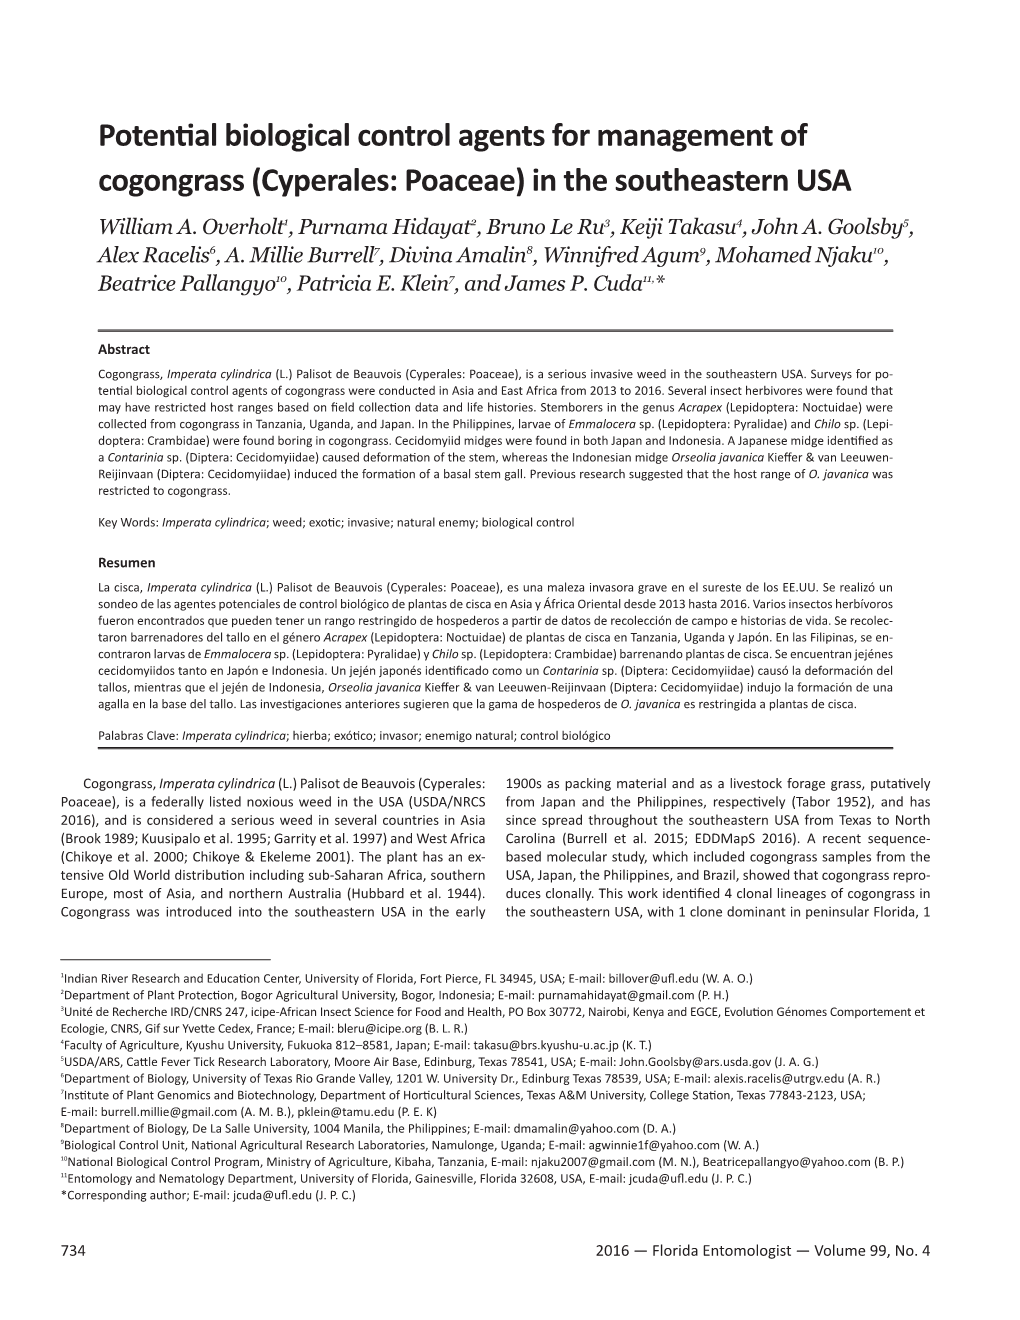 Potential Biological Control Agents for Management of Cogongrass (Cyperales: Poaceae) in the Southeastern USA William A